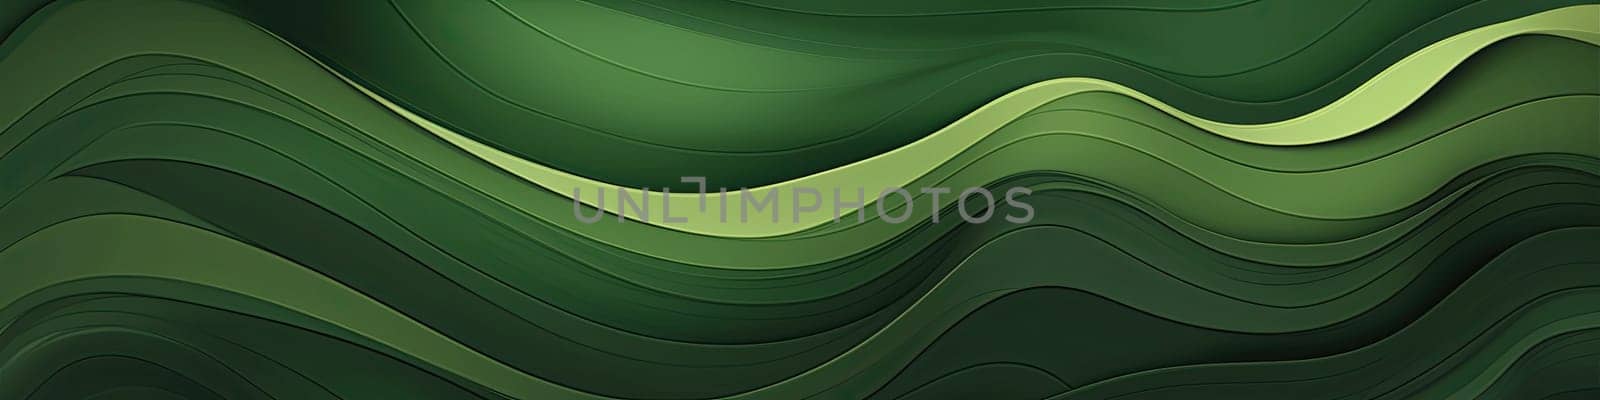 Banner with green waves background illustration with dark olive drab